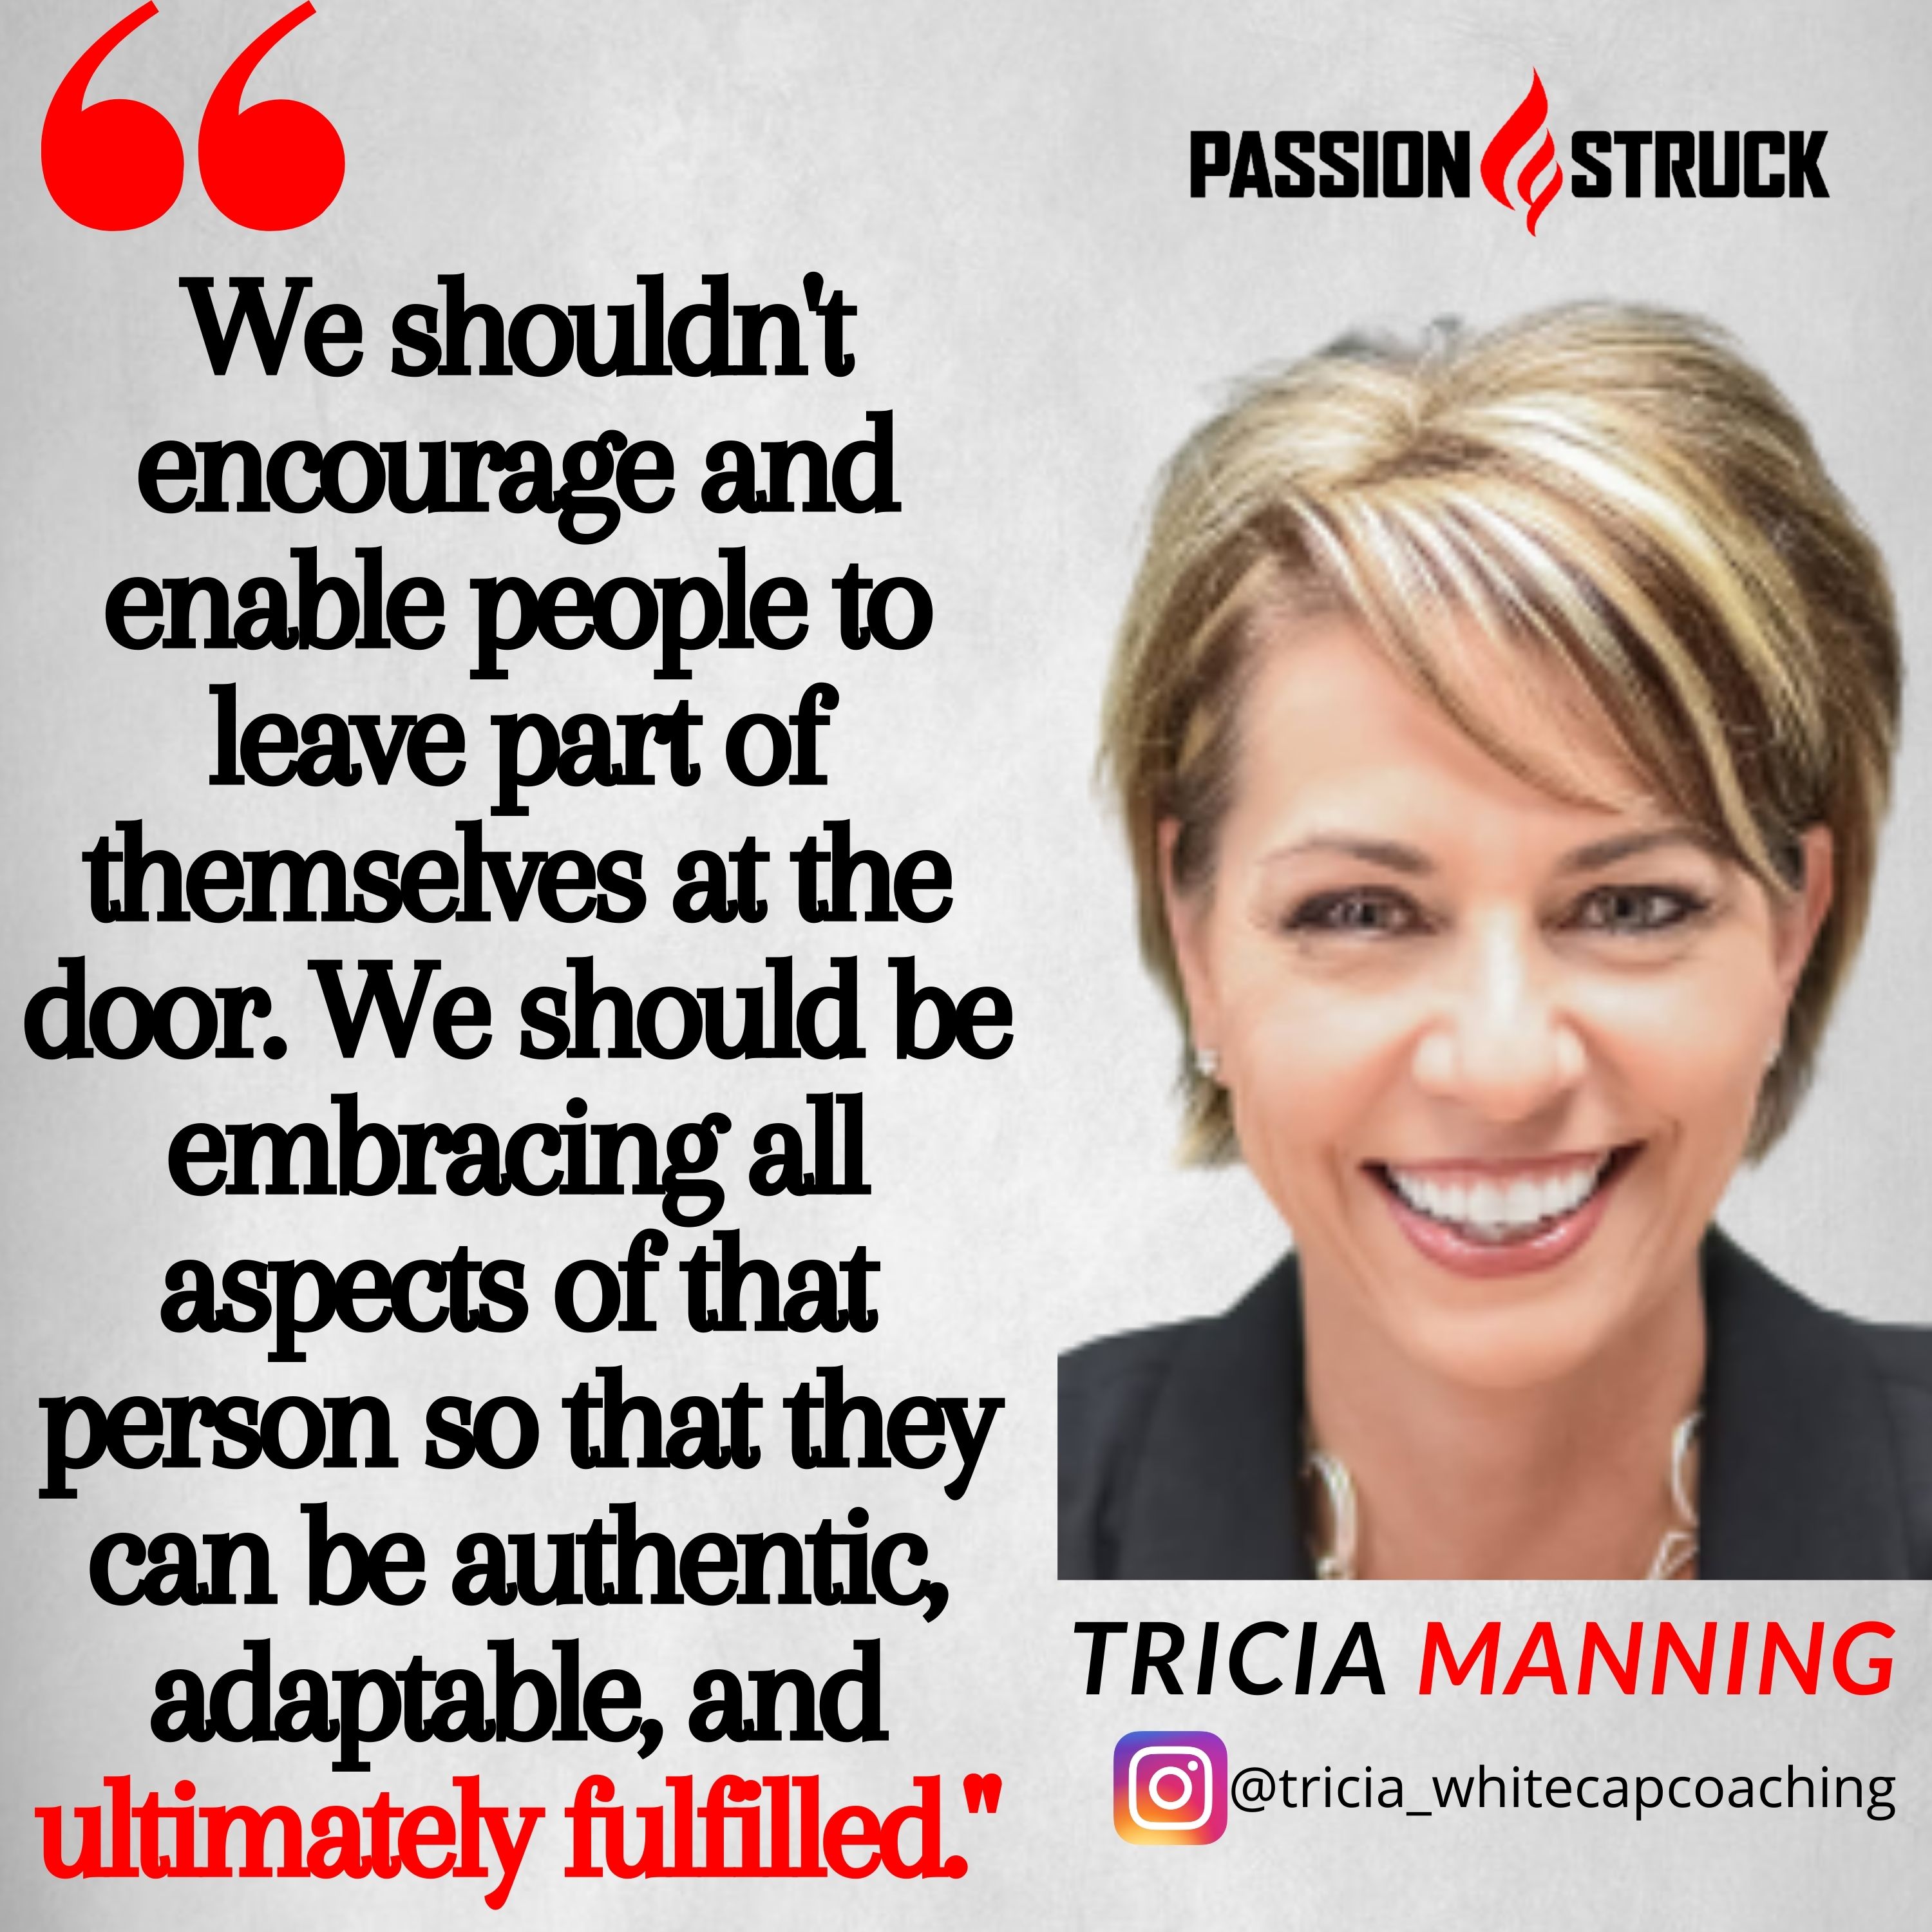 Quote from Tricia Manning on the Passion Struck podcast about how to lead with heart